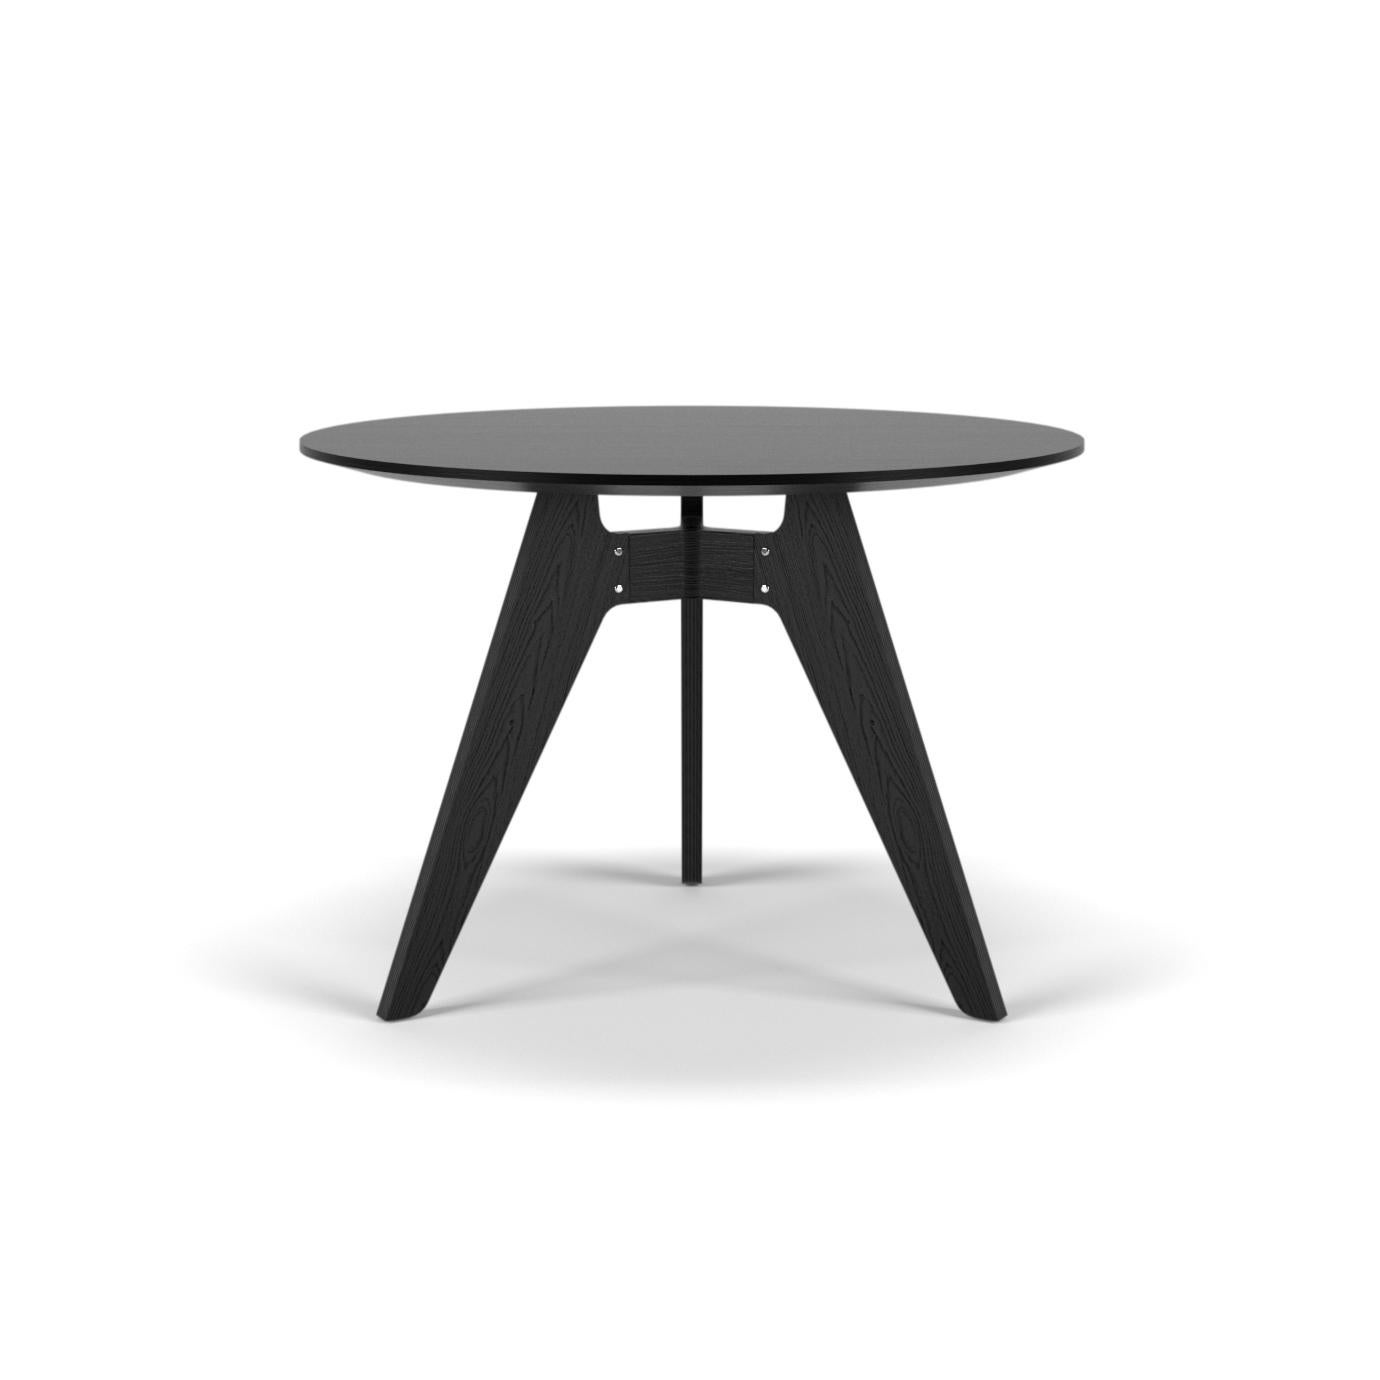 Modern Round Table 'Lavitta' by Poiat, Black Oak, 100cm In New Condition For Sale In Paris, FR